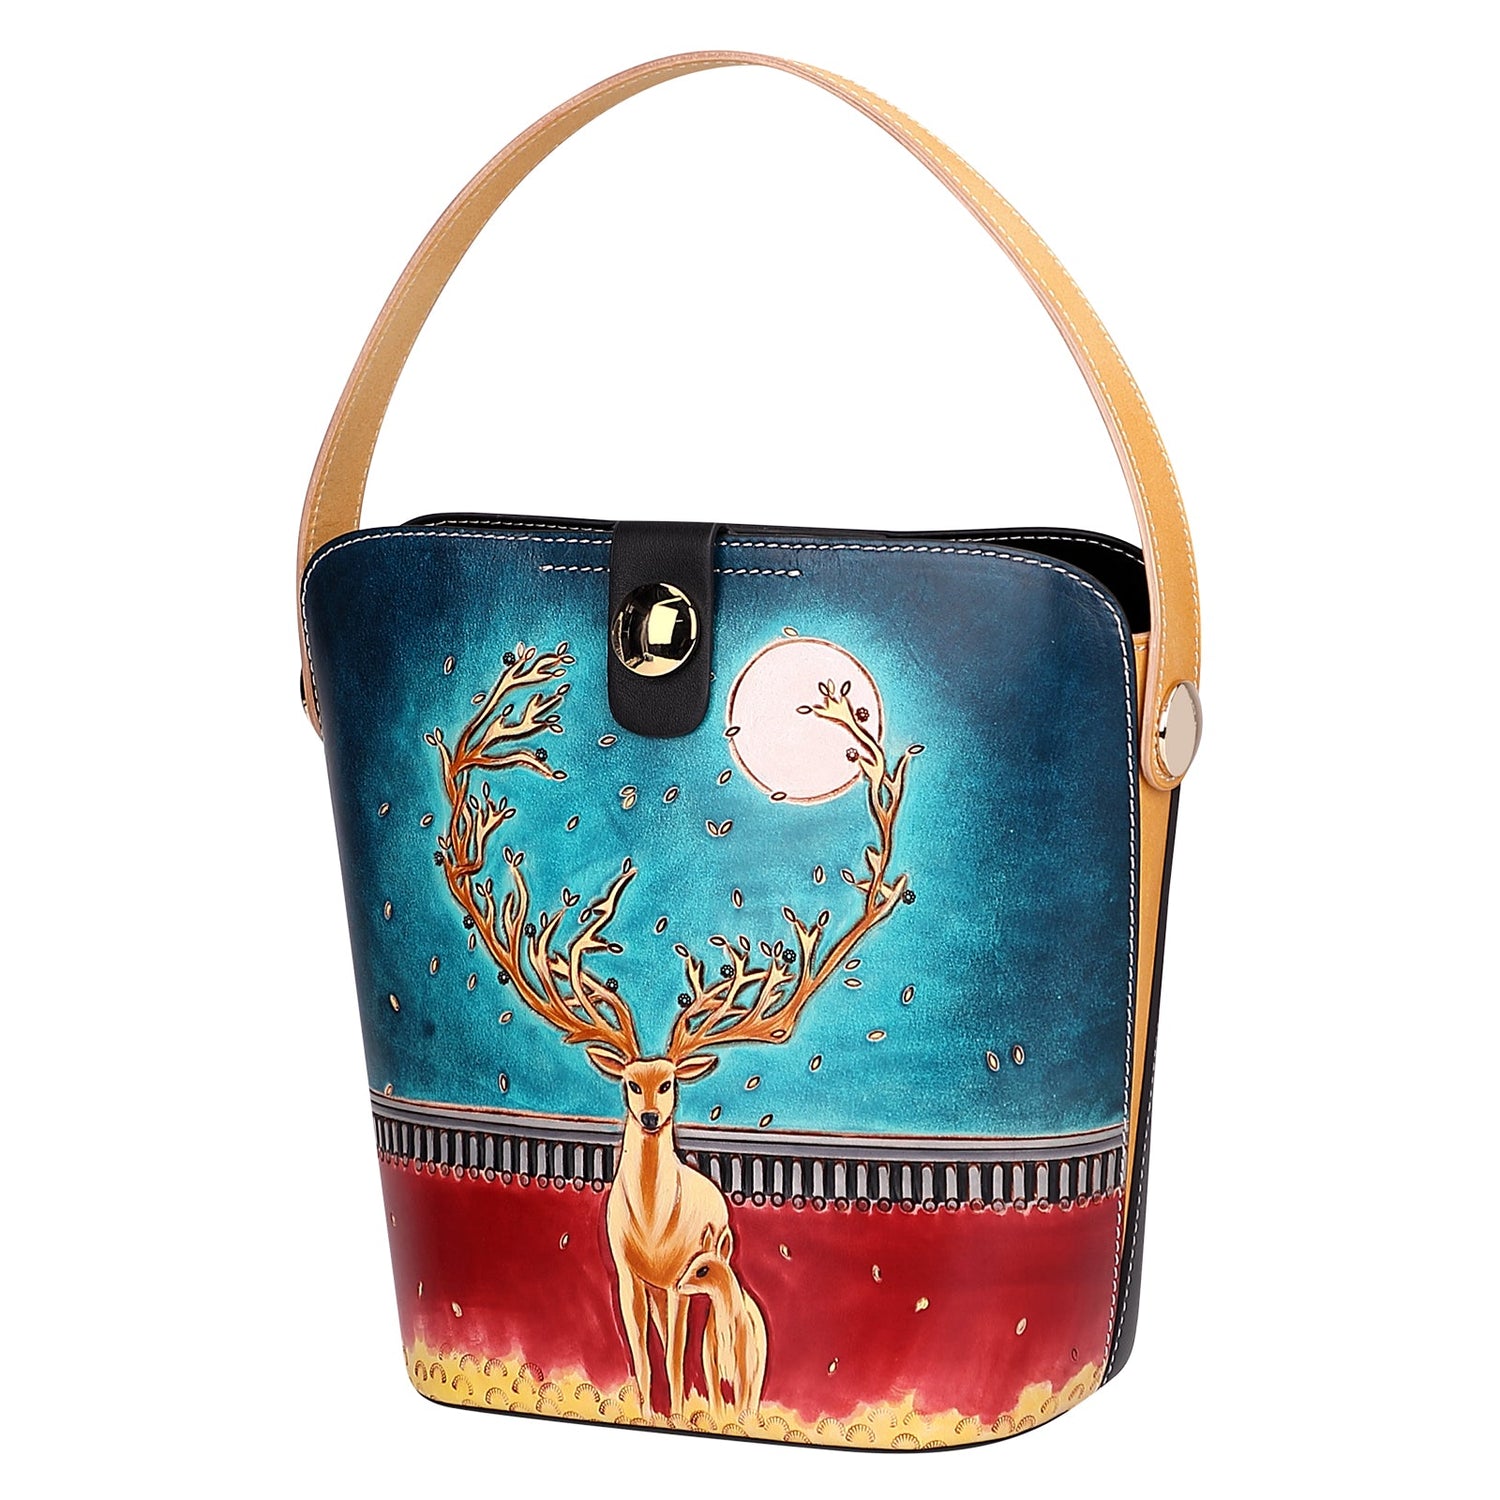 PIJUSHI Leather Satchel Bags Women Hand Painted